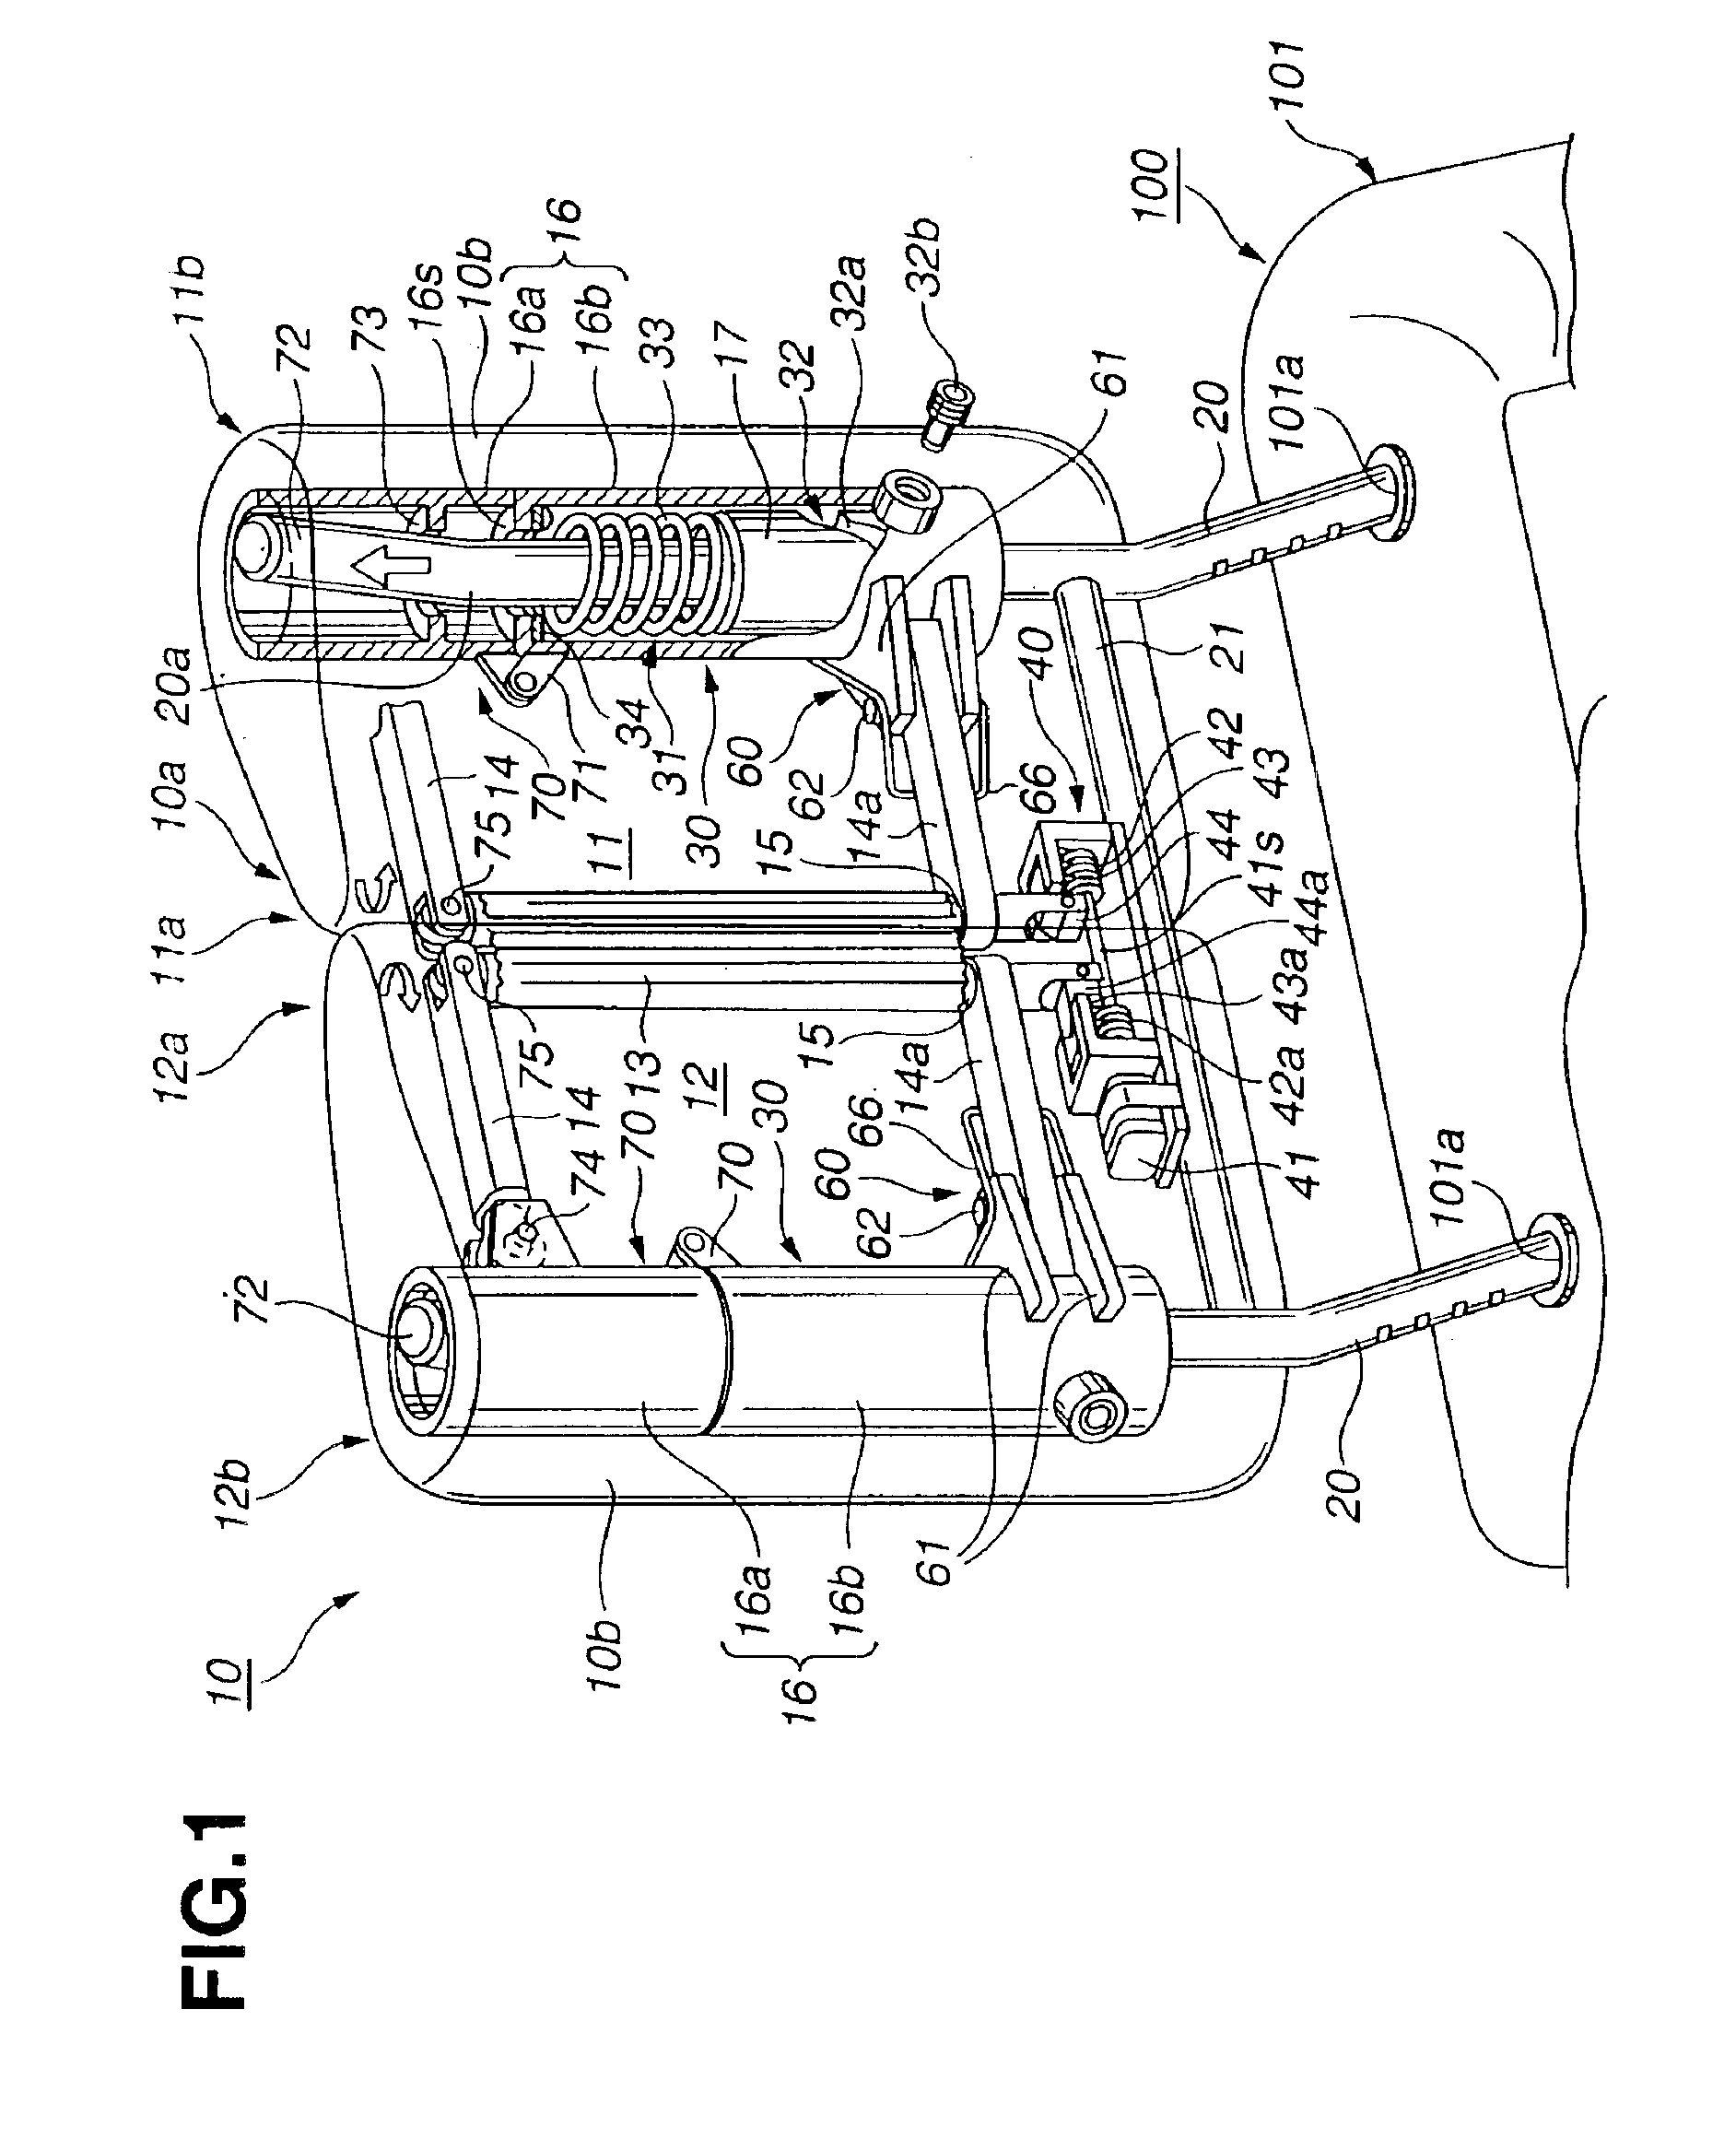 Headrest apparatus for vehicle